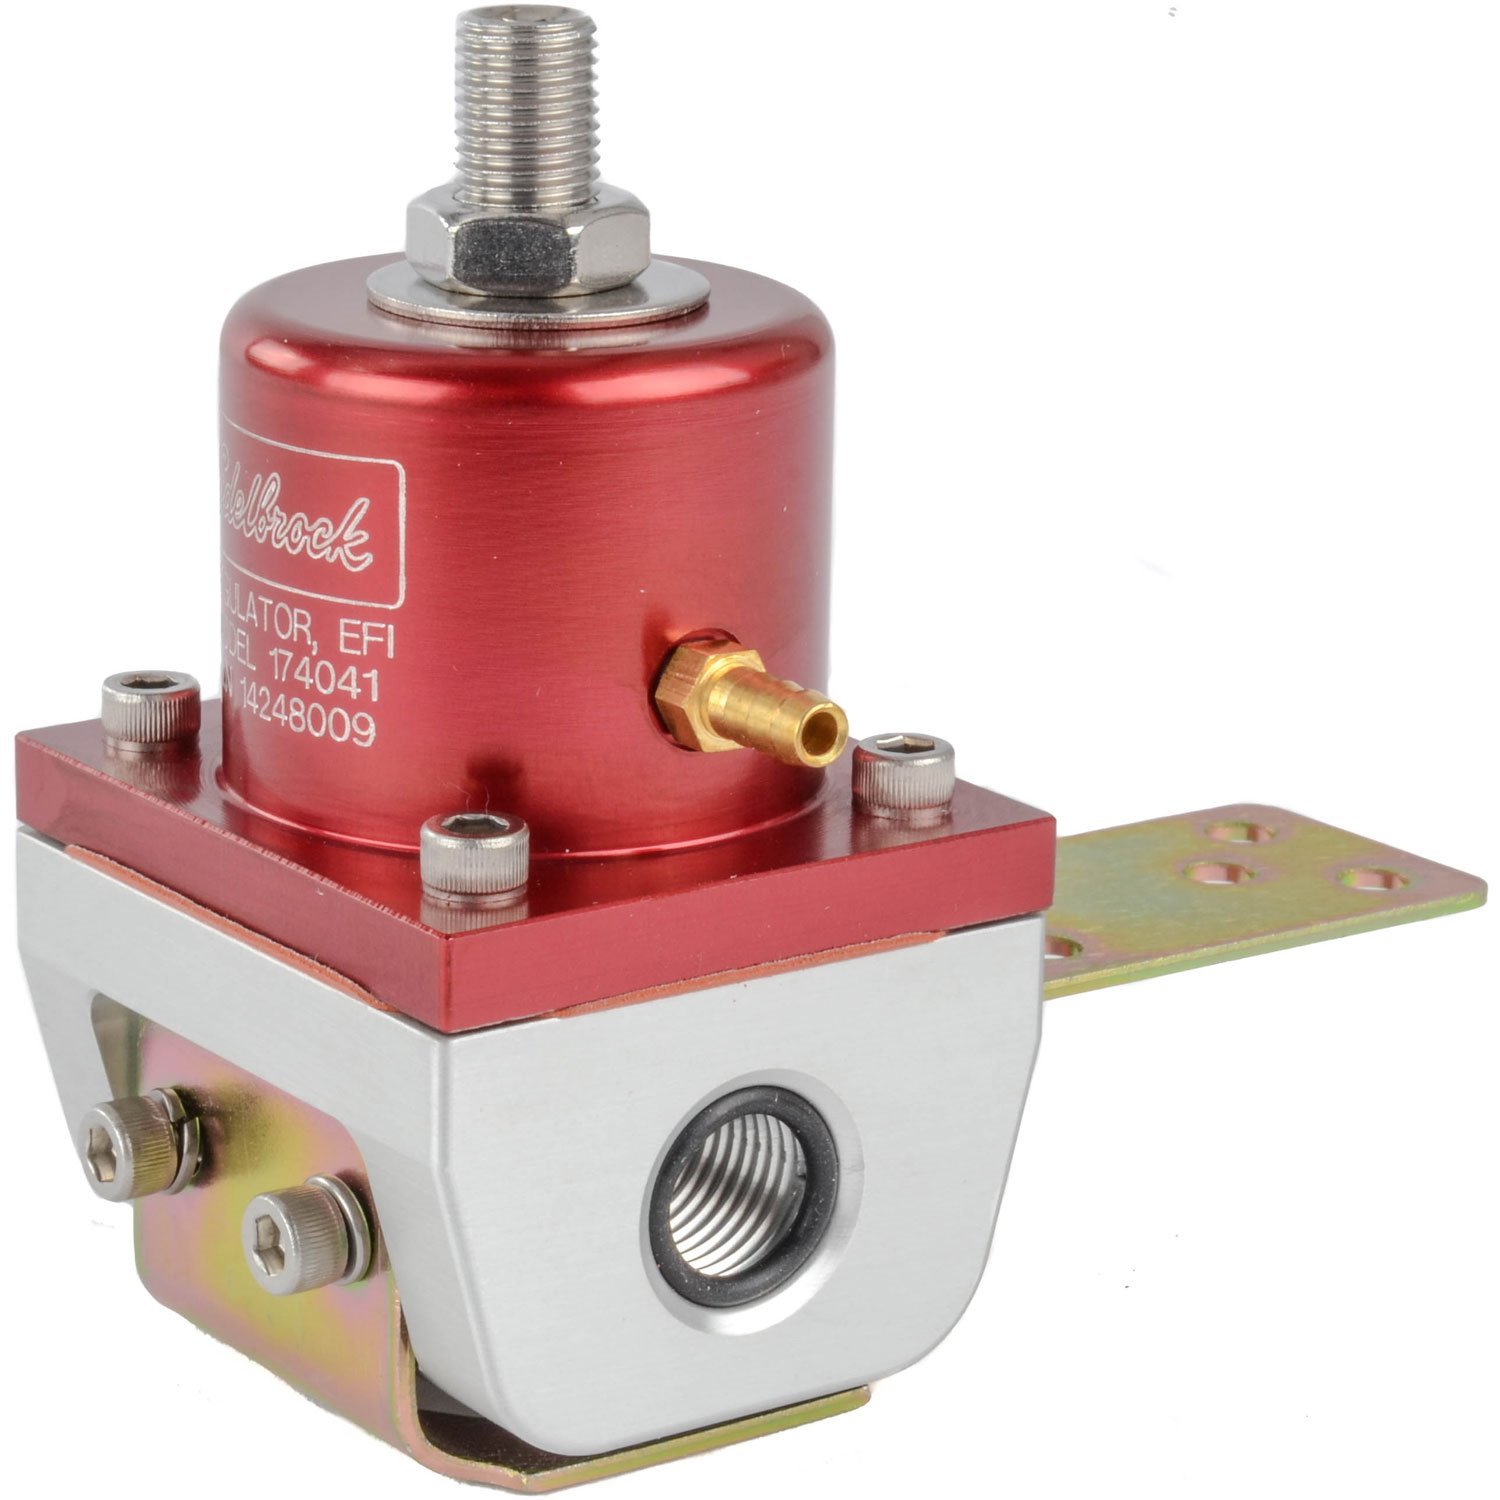 EFI Adjustable Fuel Pressure Regulator 180 GPH with -6AN Inlet/Outlet/Bypass in Red Finish